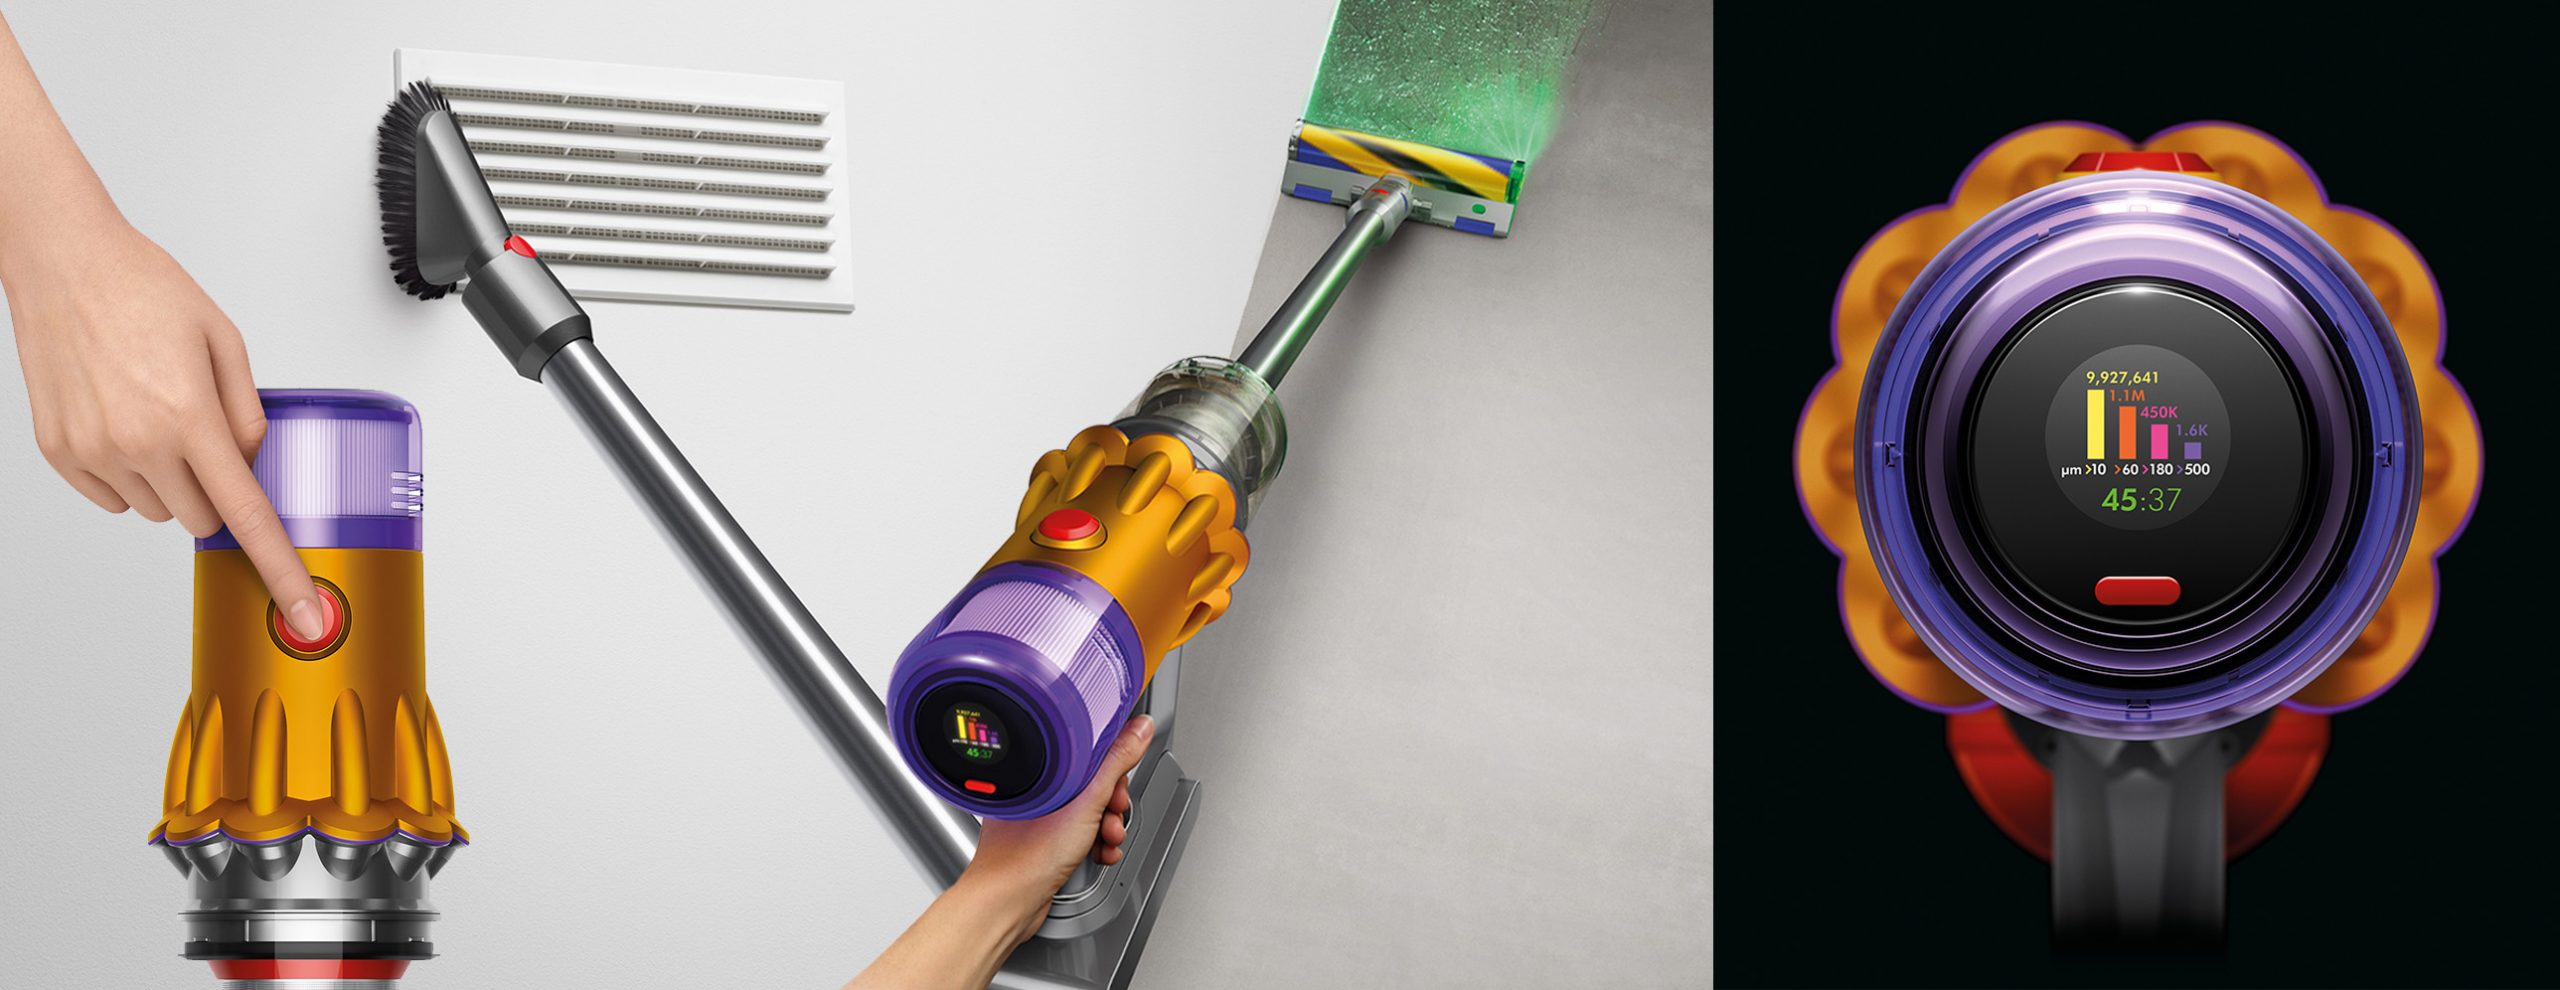 The new Dyson V12 Detect Slim Total Clean uses lasers to detect 